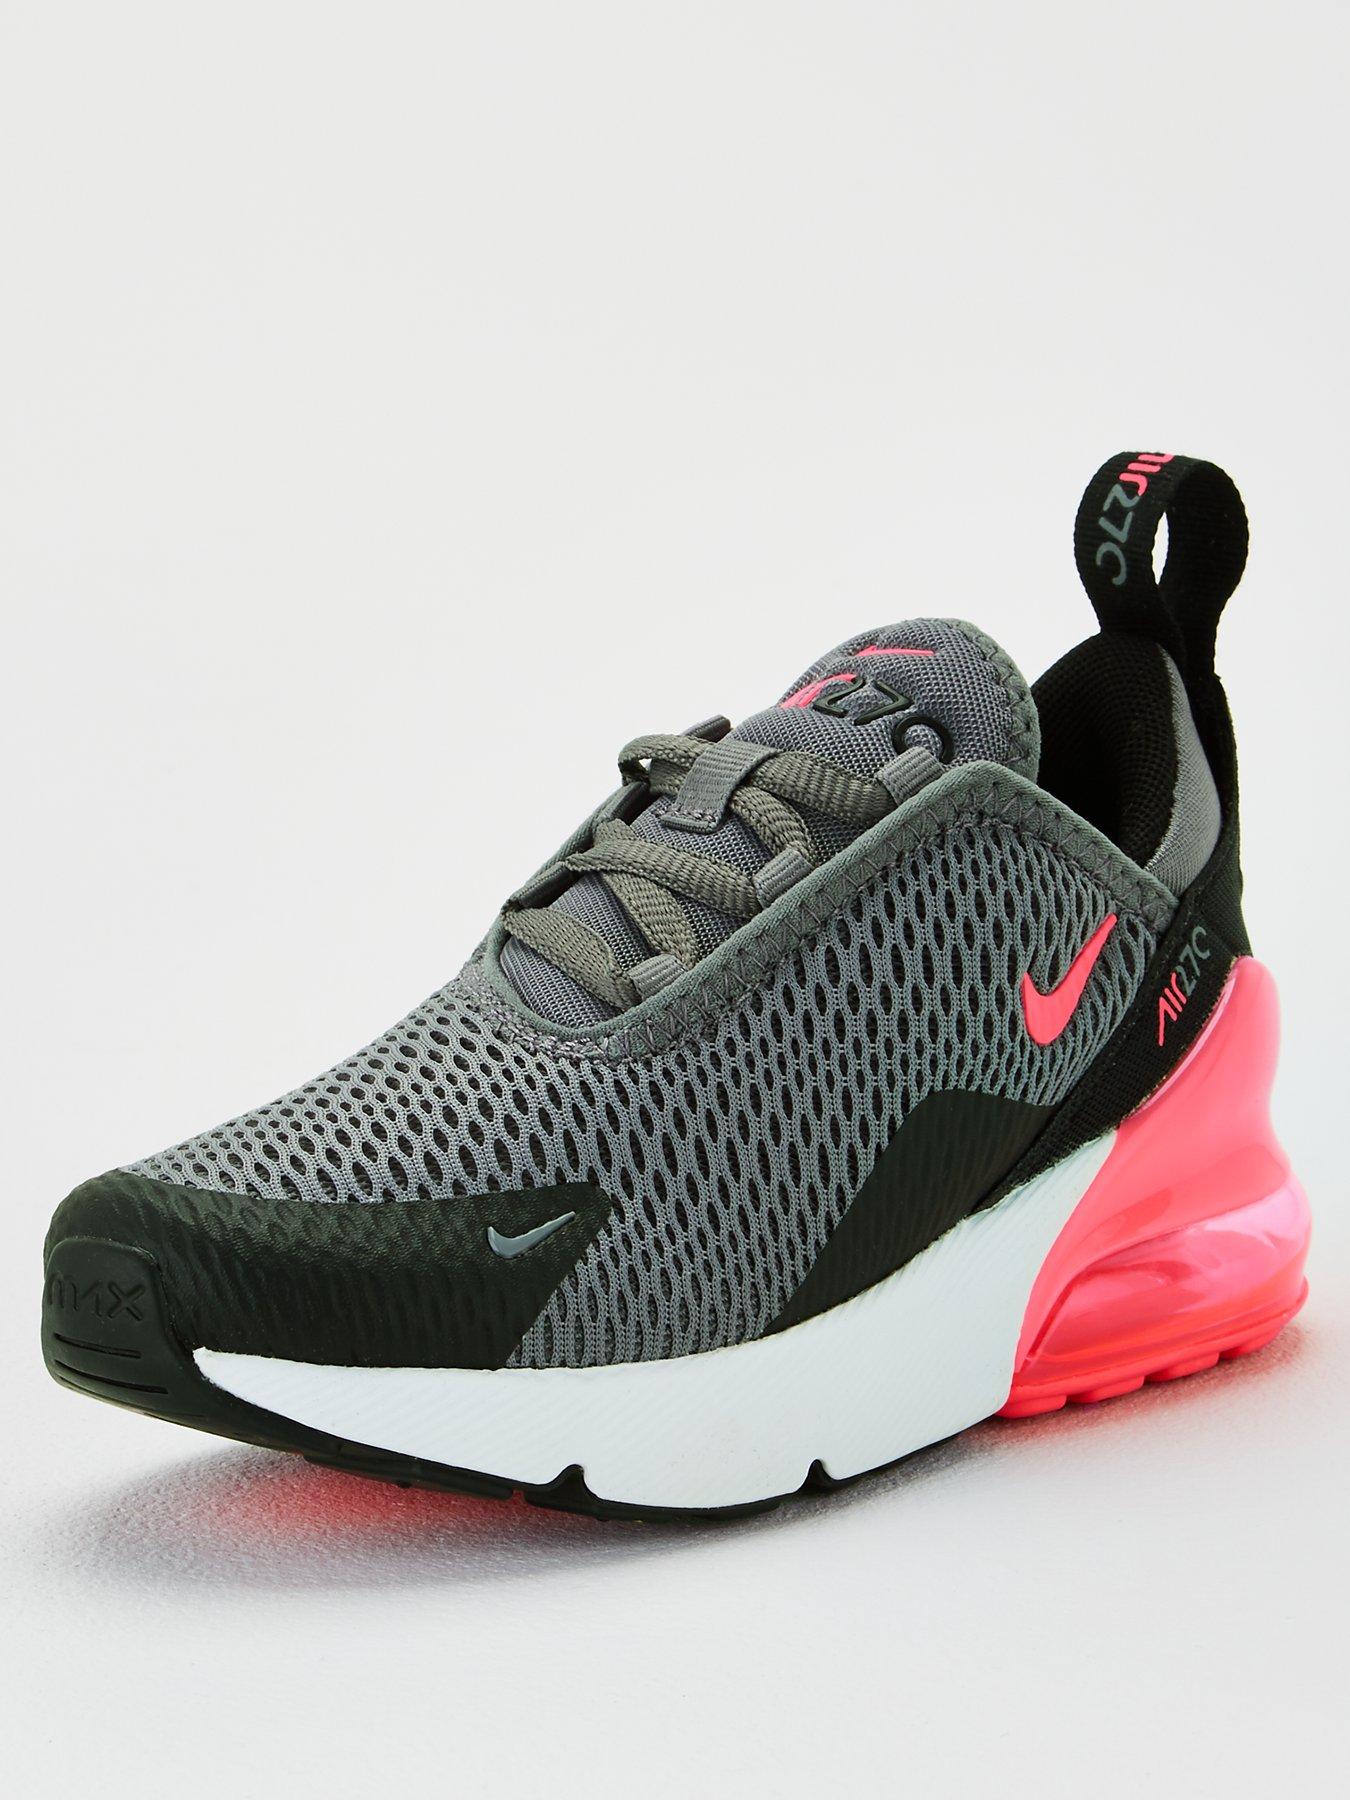 grey and pink nike 270